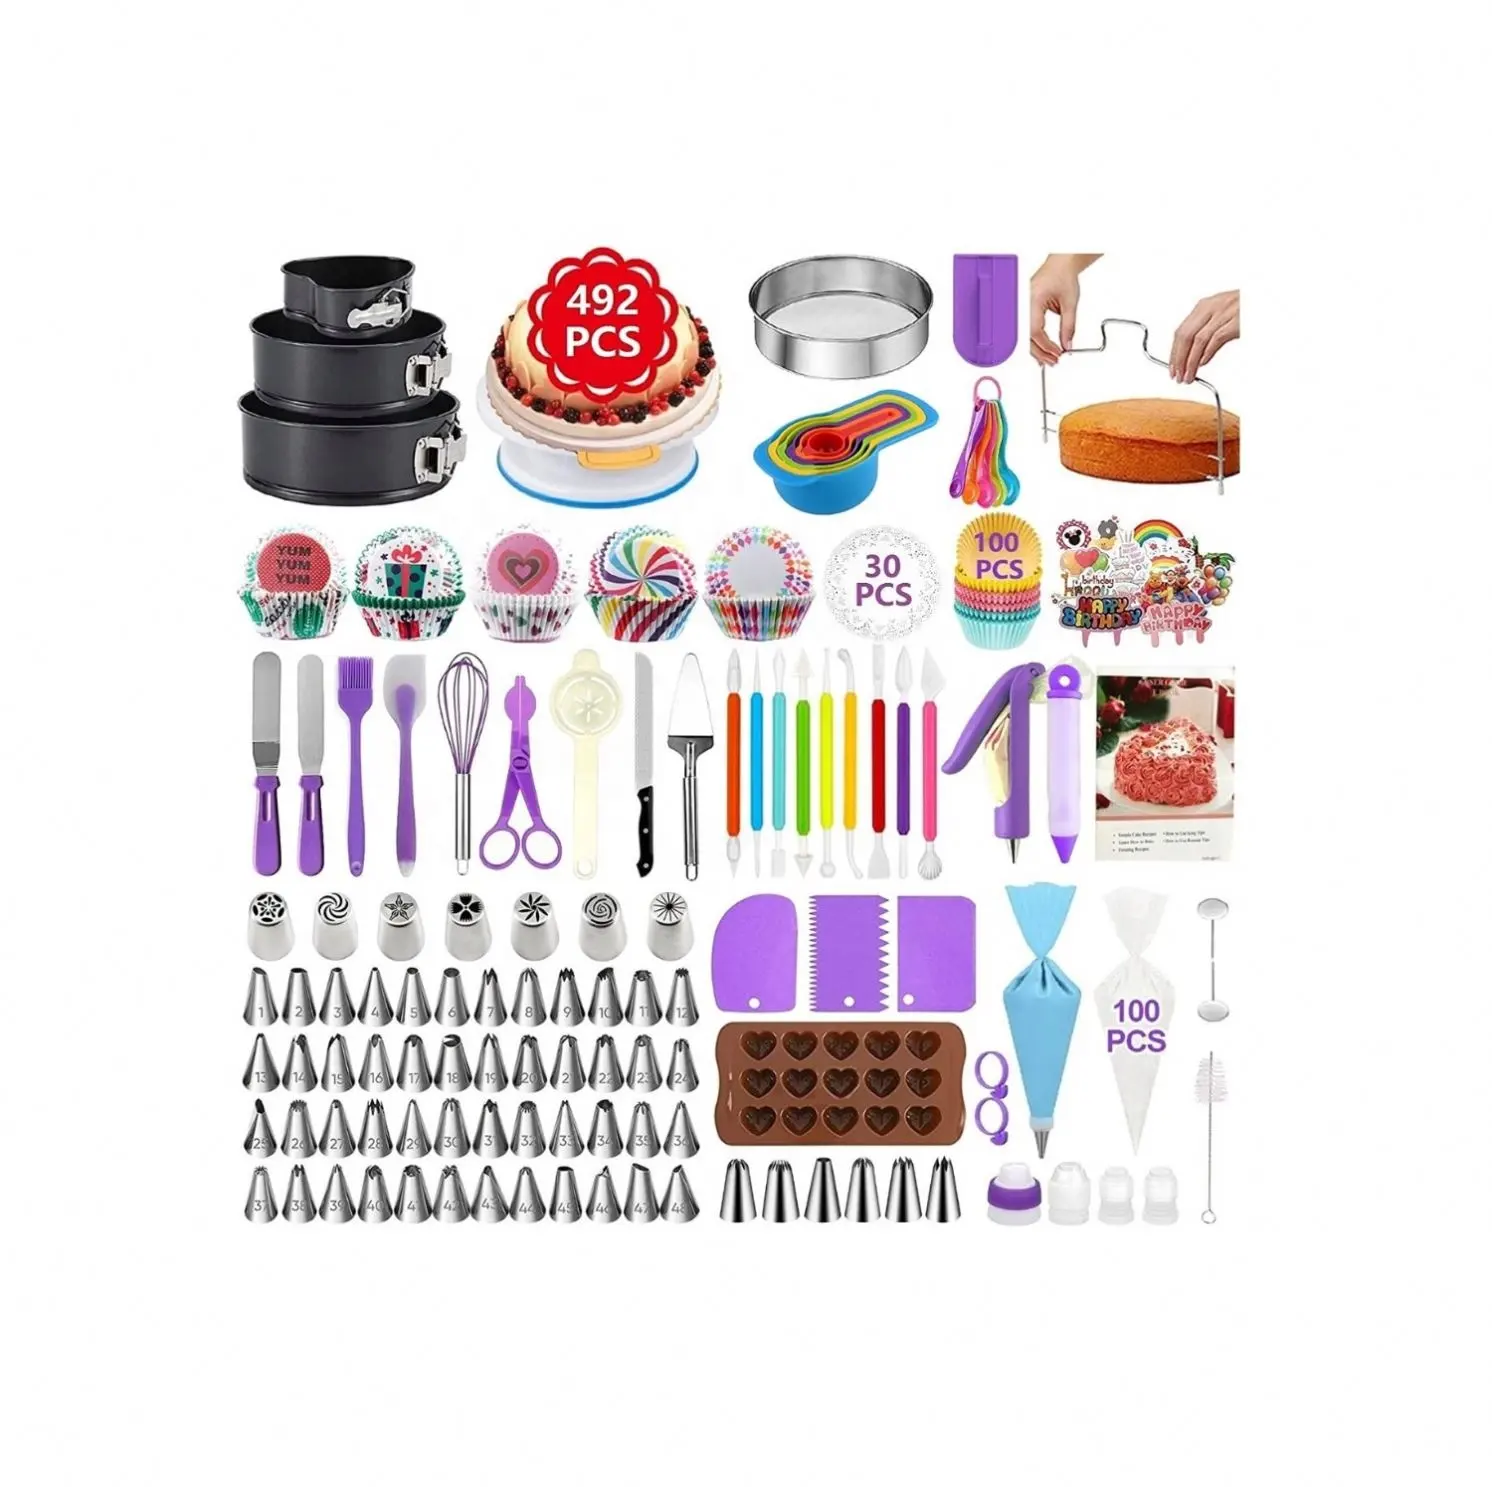 492 Pcs Cake Decorating Supplies with Baking Springform Cake Pans Set Icing Tips Nozzles Cake Decorating Kit for Beginners